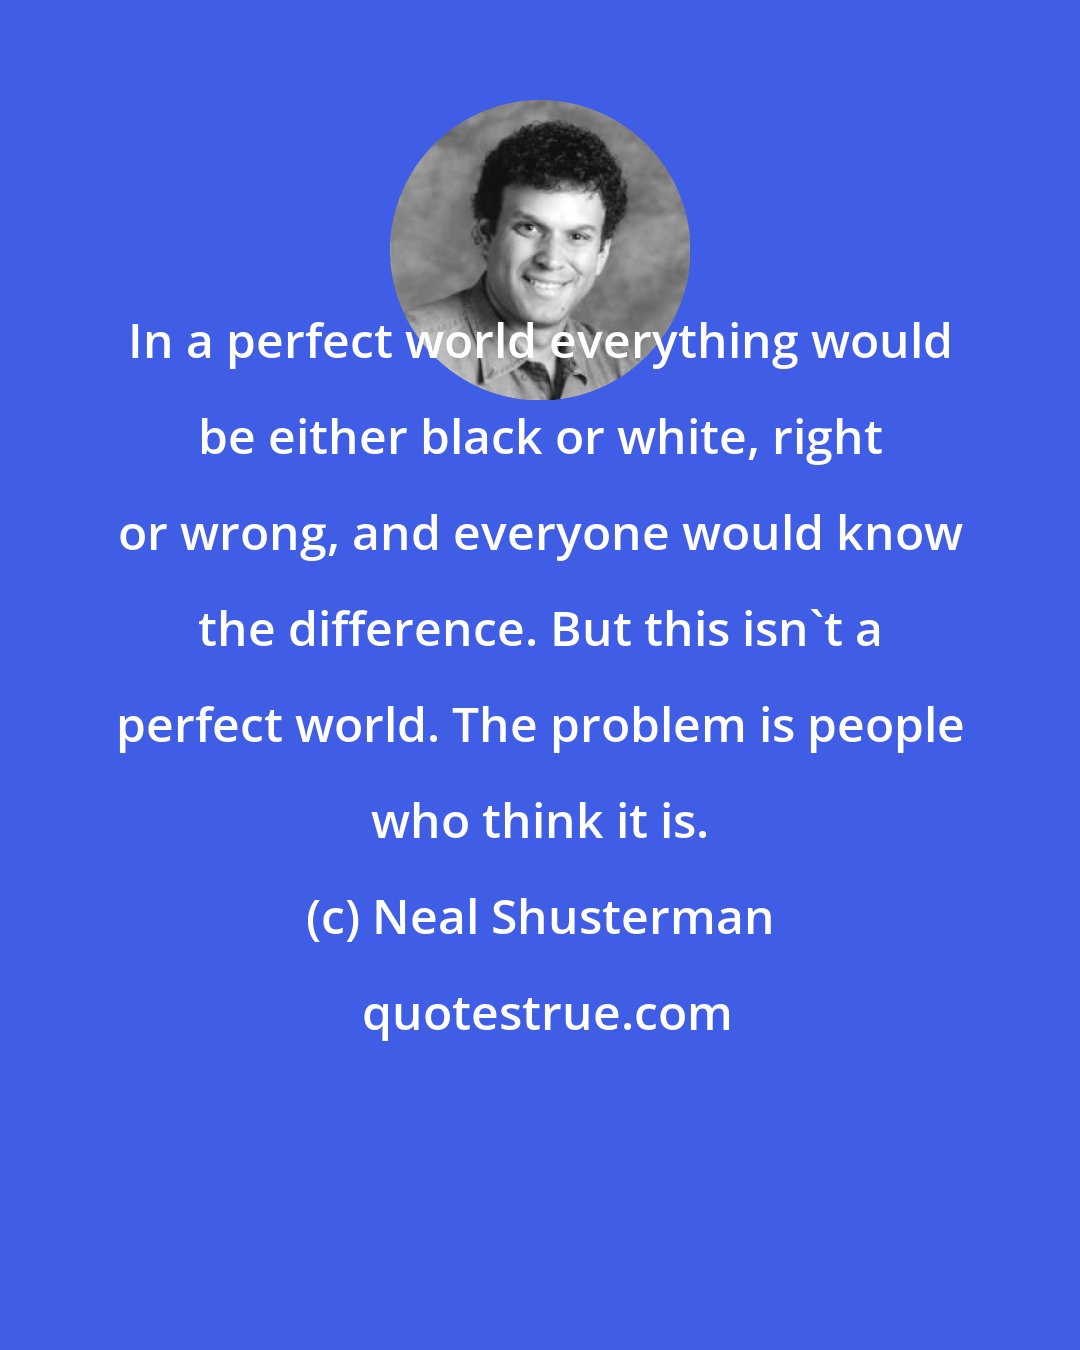 Neal Shusterman: In a perfect world everything would be either black or white, right or wrong, and everyone would know the difference. But this isn't a perfect world. The problem is people who think it is.